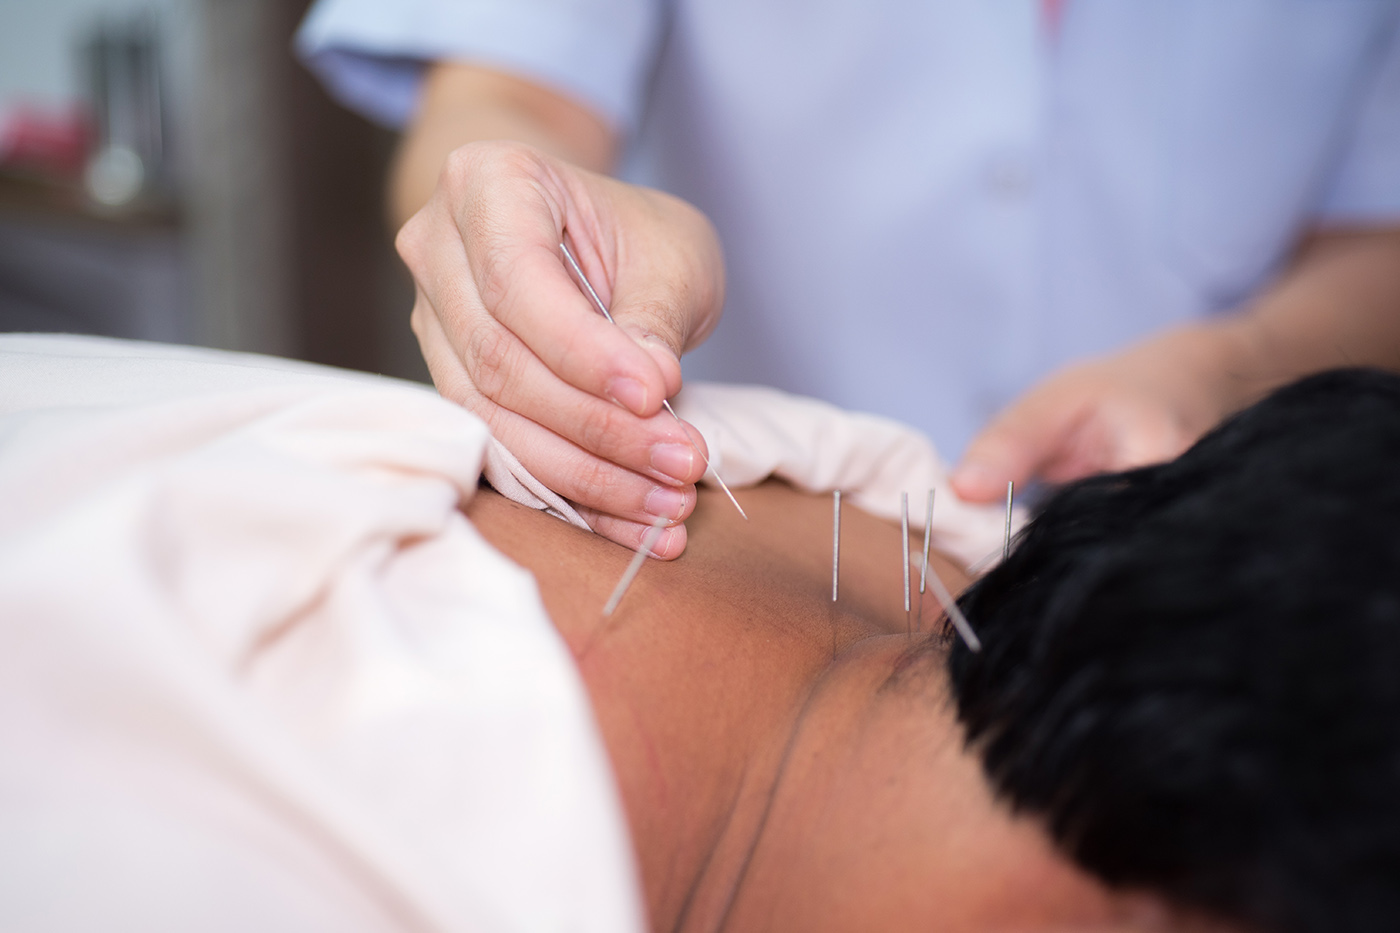 DRY NEEDLING THERAPY